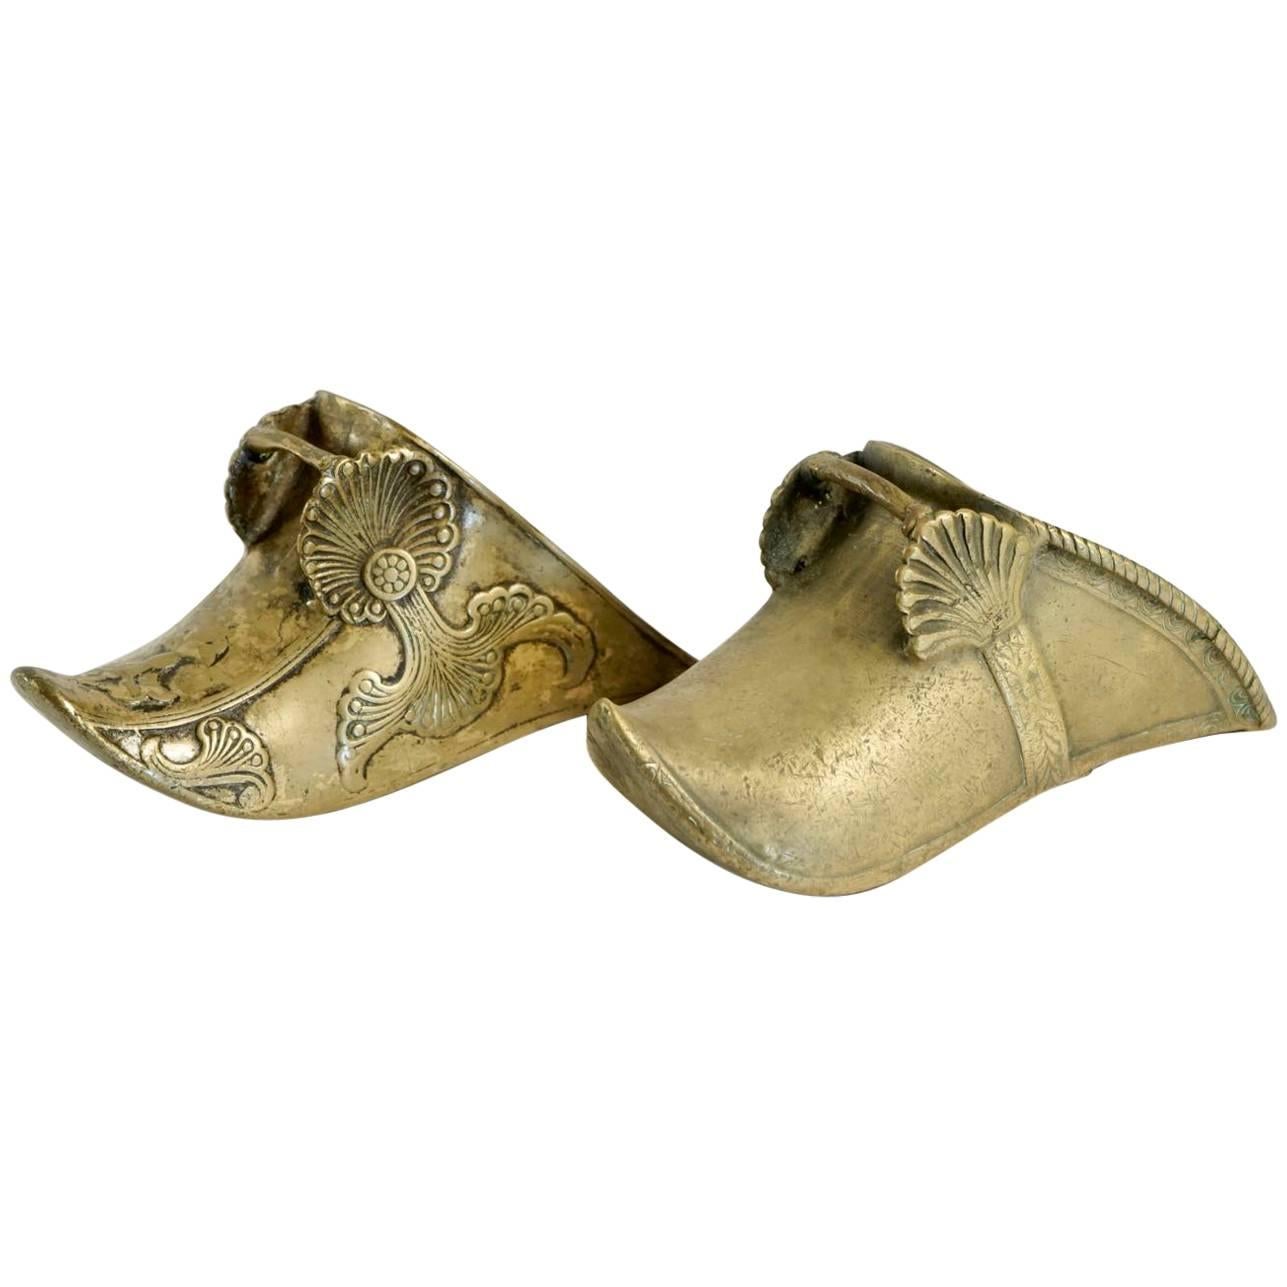 Two Dutch Shoes from the 17th Century in Bronze